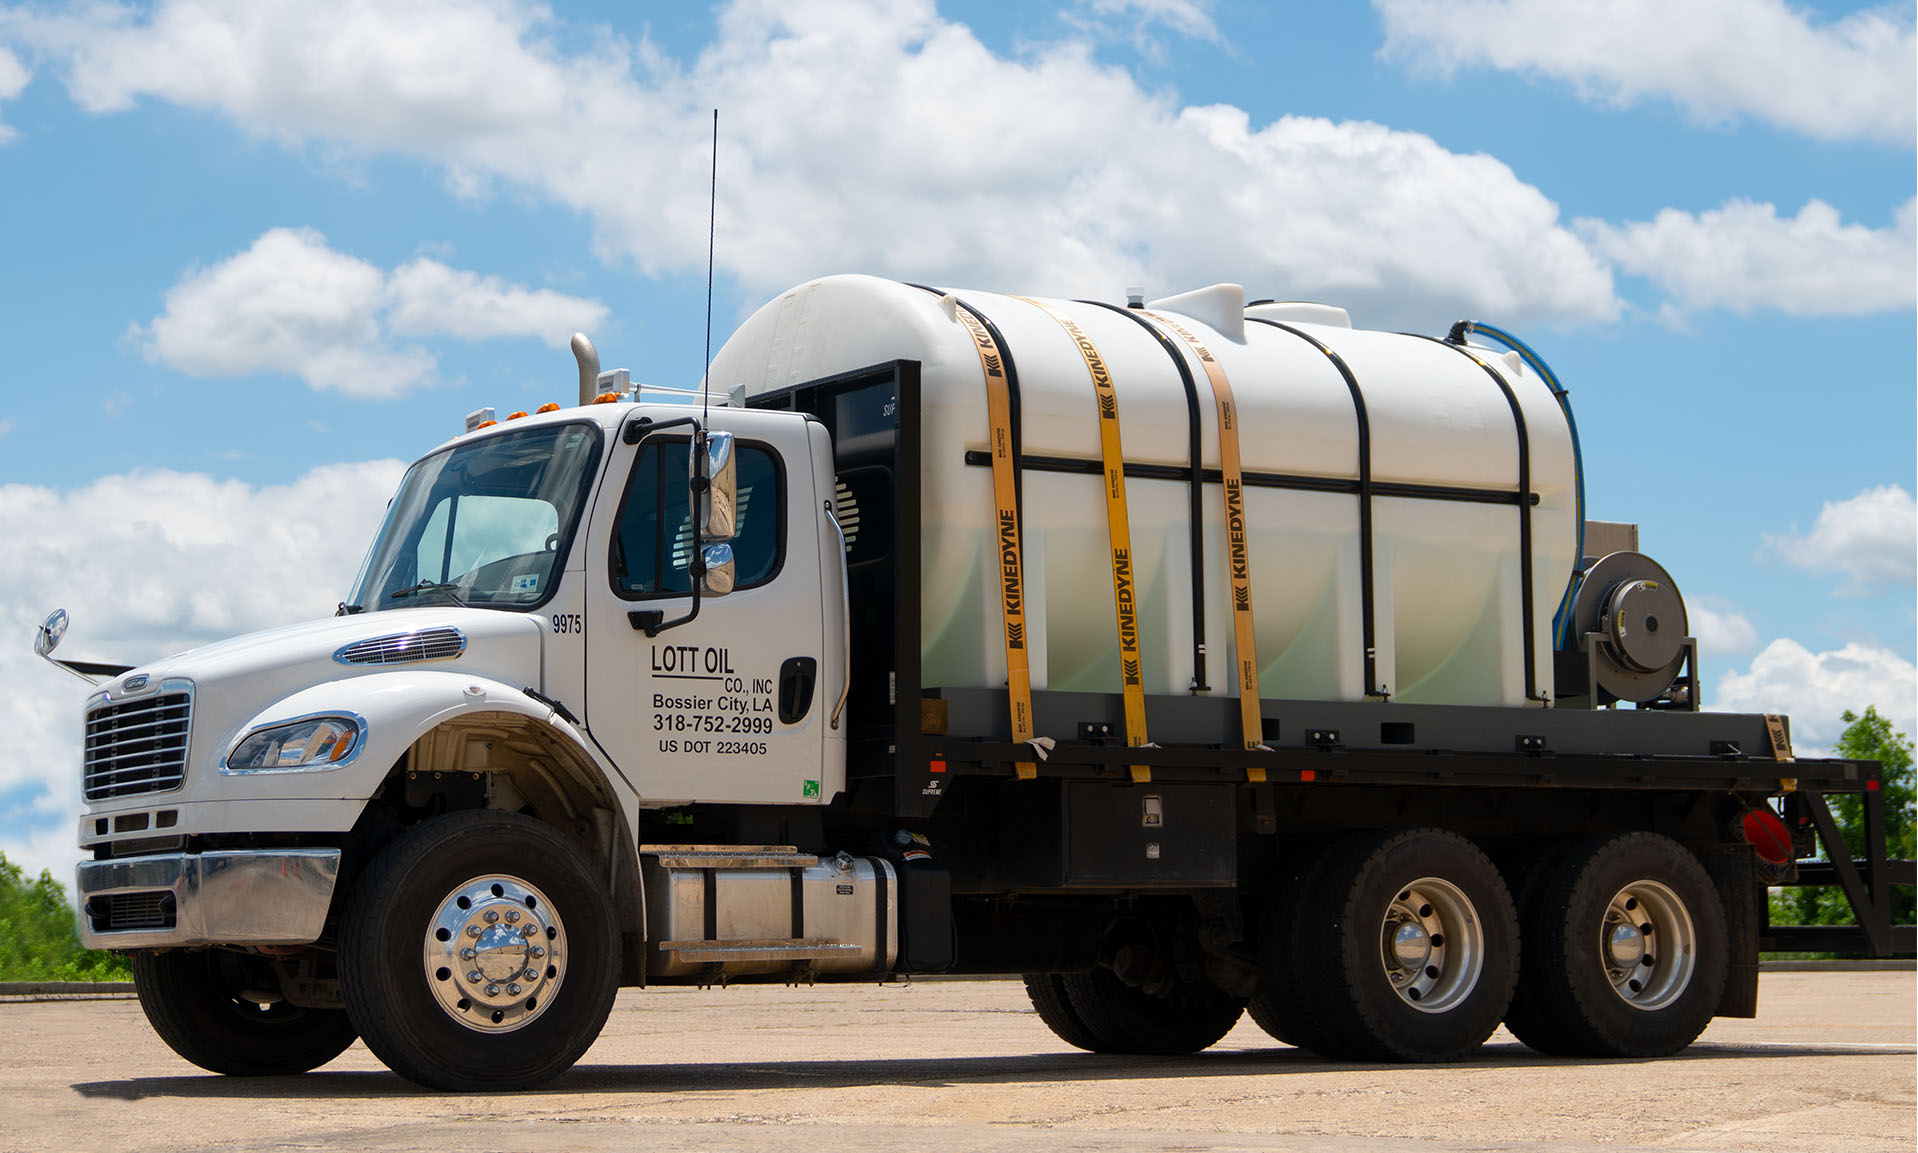 Manage diesel exhaust fluid cost efficiently.